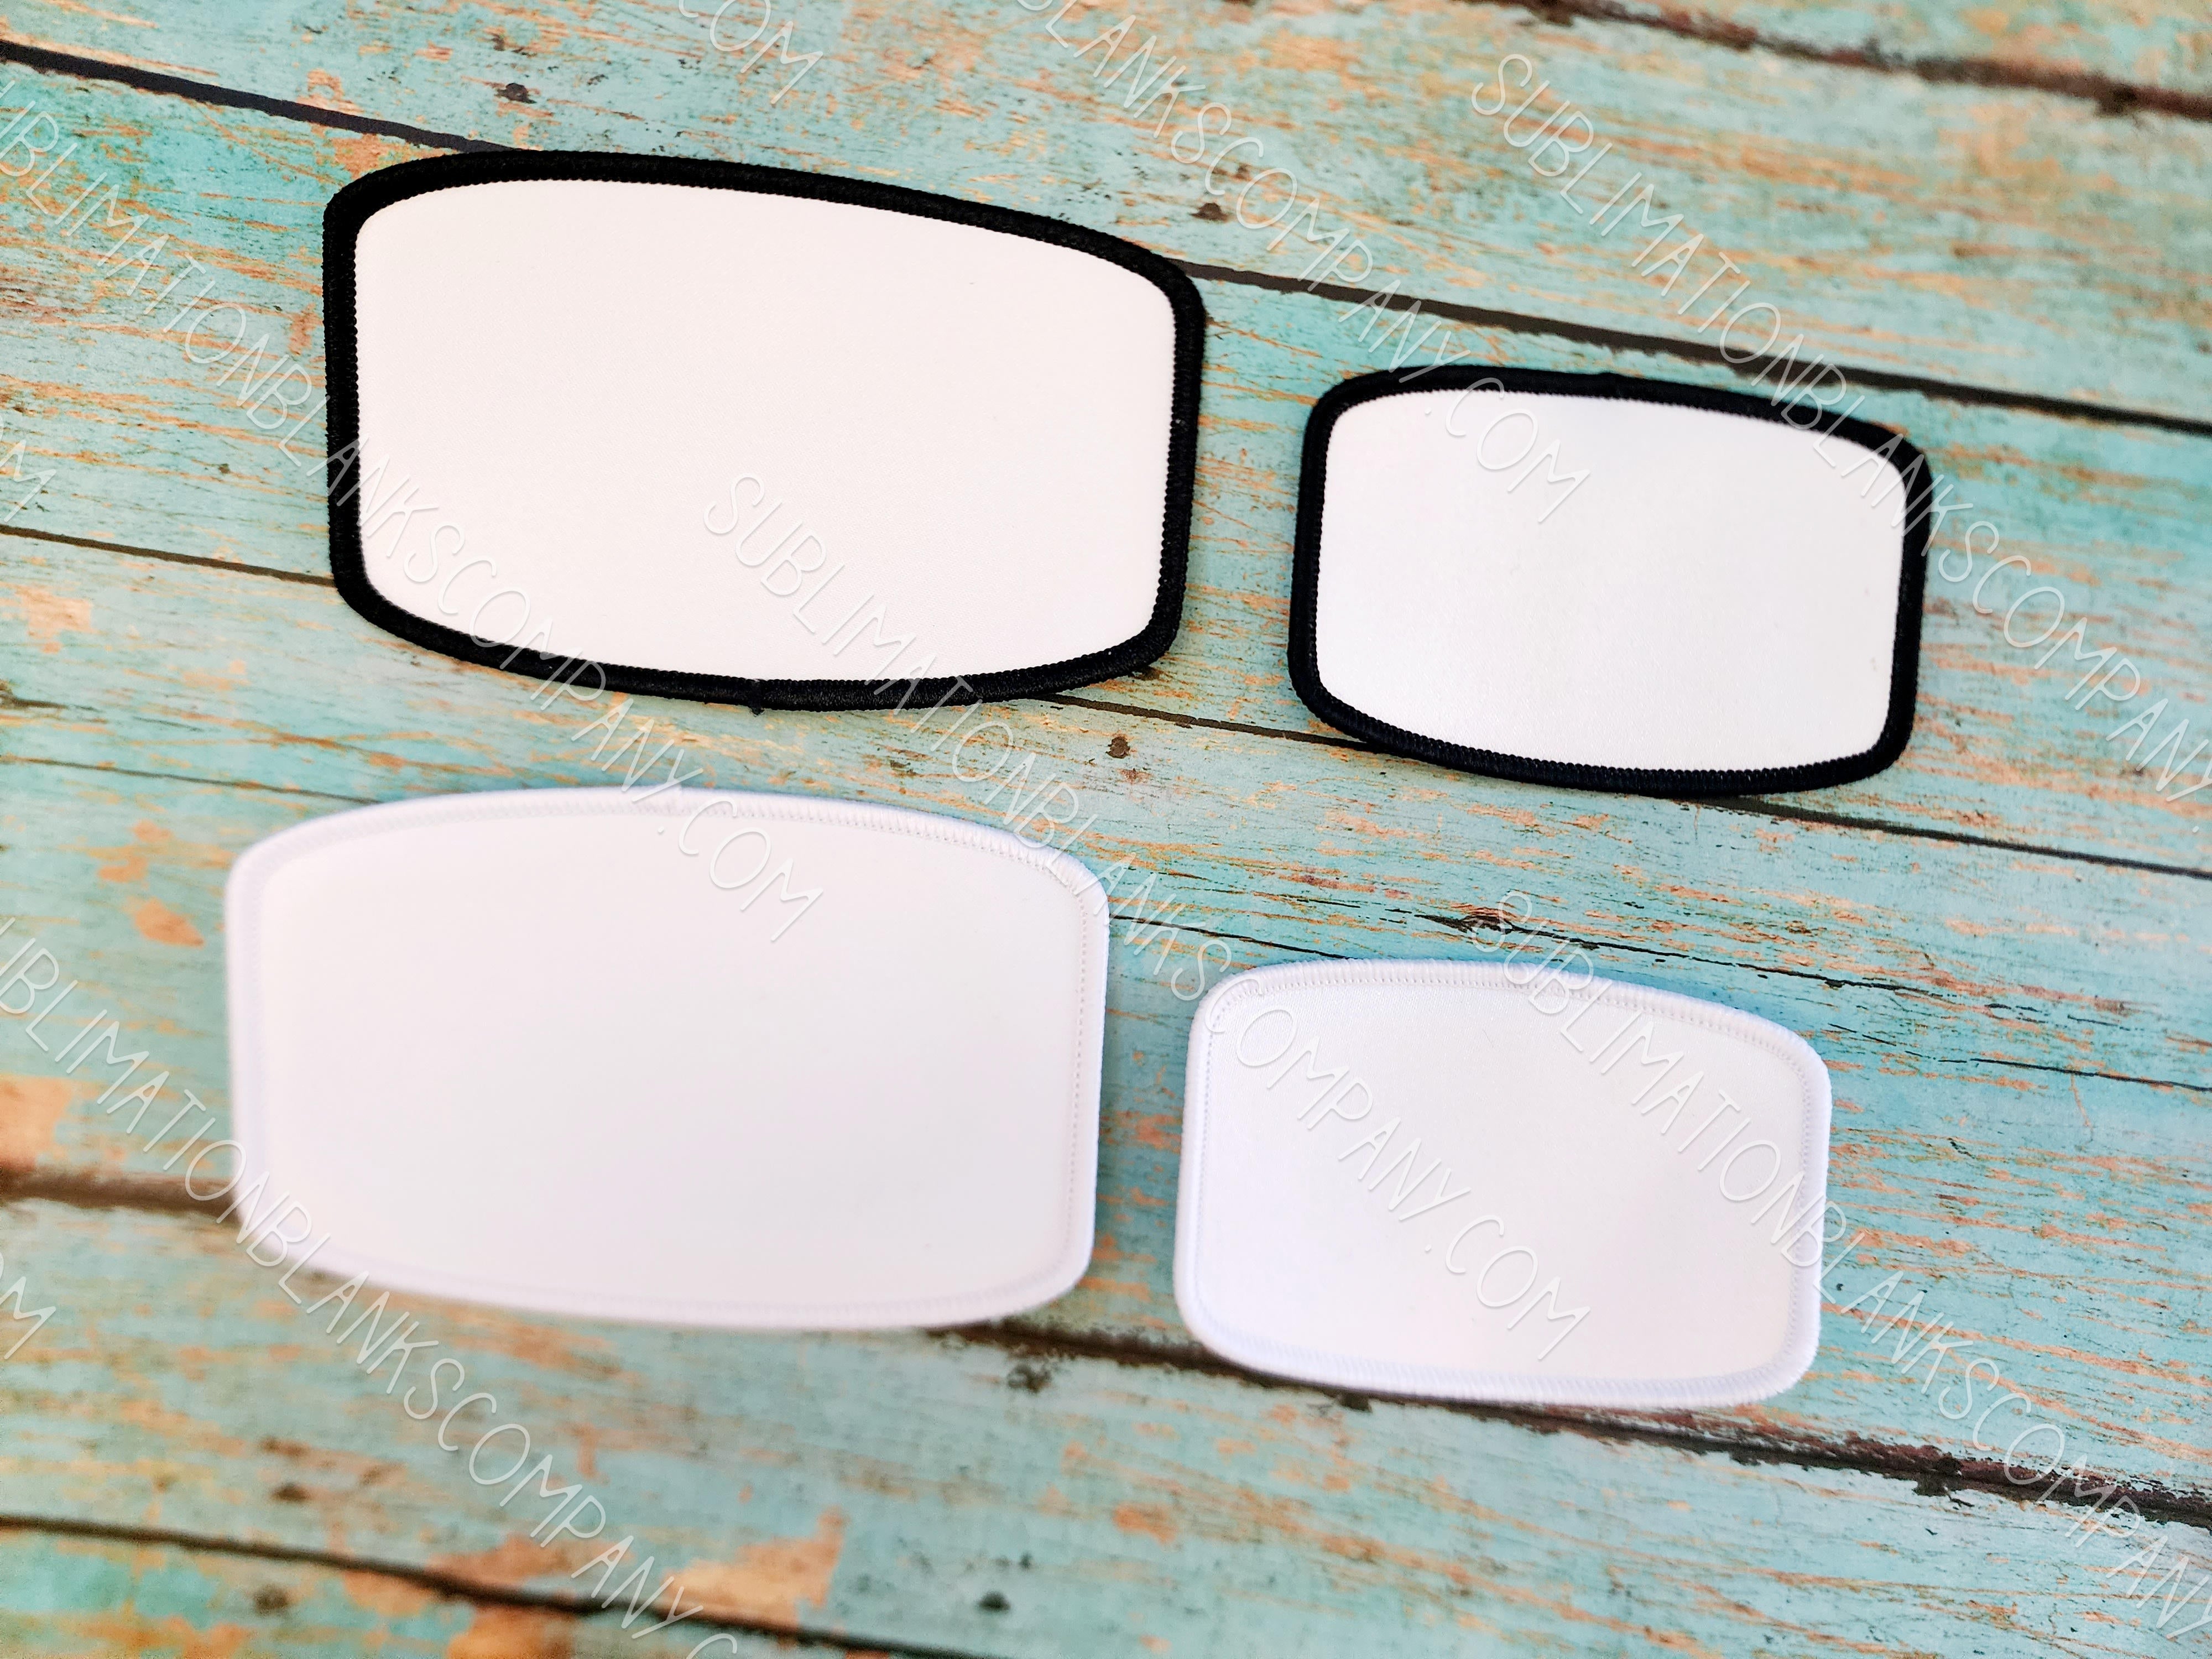 Set of Ten! Rounded Rectangle Hat Patch Sublimation Blank with Black Trim.  100% Polyester!